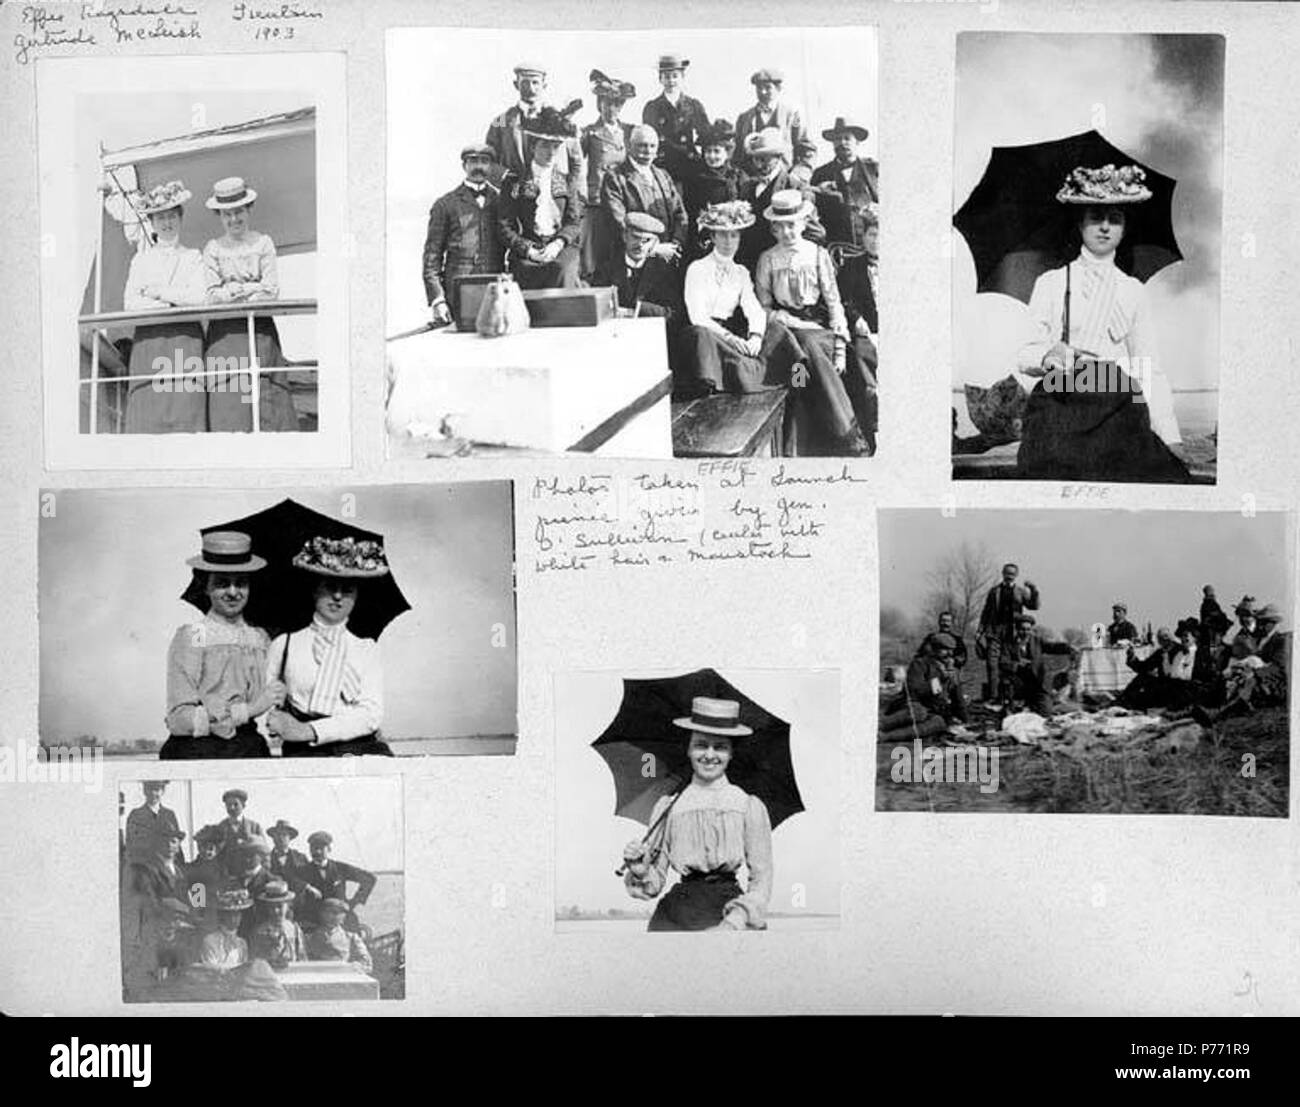 . English: 7.21 Effie Ragsdale, Gertrude McLeish, and friends on social outings, Tientsin, 1903 . English: Captions on album page: Effie Ragsdale, Gertrude McLeish, Tien Tsin, 1903; Effie; Photos taken at lunch picnic given by Gen. O'Sullivan (center with white hair and moustach [i.e. mustache]); Effie . PH Coll 241.B21a-g Subjects (LCTGM): Women--Clothing & dress--China--Tianjin; Hats; Umbrellas; Picnics--China--Tianjin; Eating & drinking--China--Tianjin Subjects (LCSH): Ragsdale, Effie; McLeish, Gertrude; Whites--China--Tianjin; Portraits, Group  . 1903 1 721 Effie Ragsdale, Gertrude McLeish Stock Photo